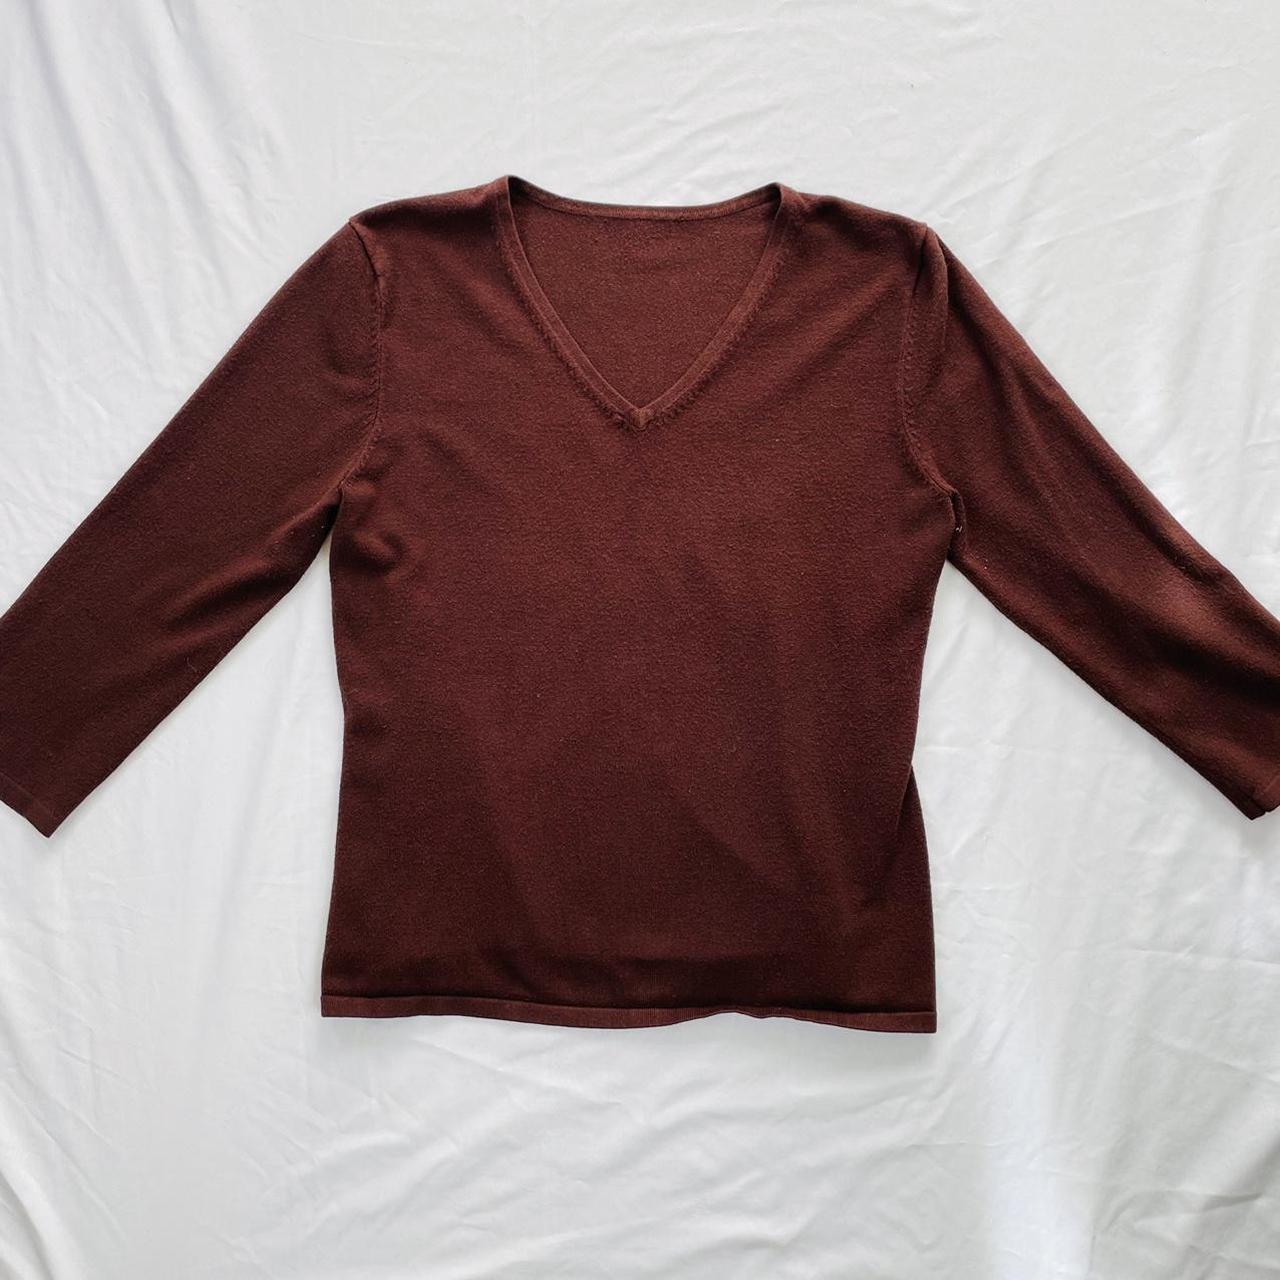 Product Image 1 - brown fitted top 

very flattering